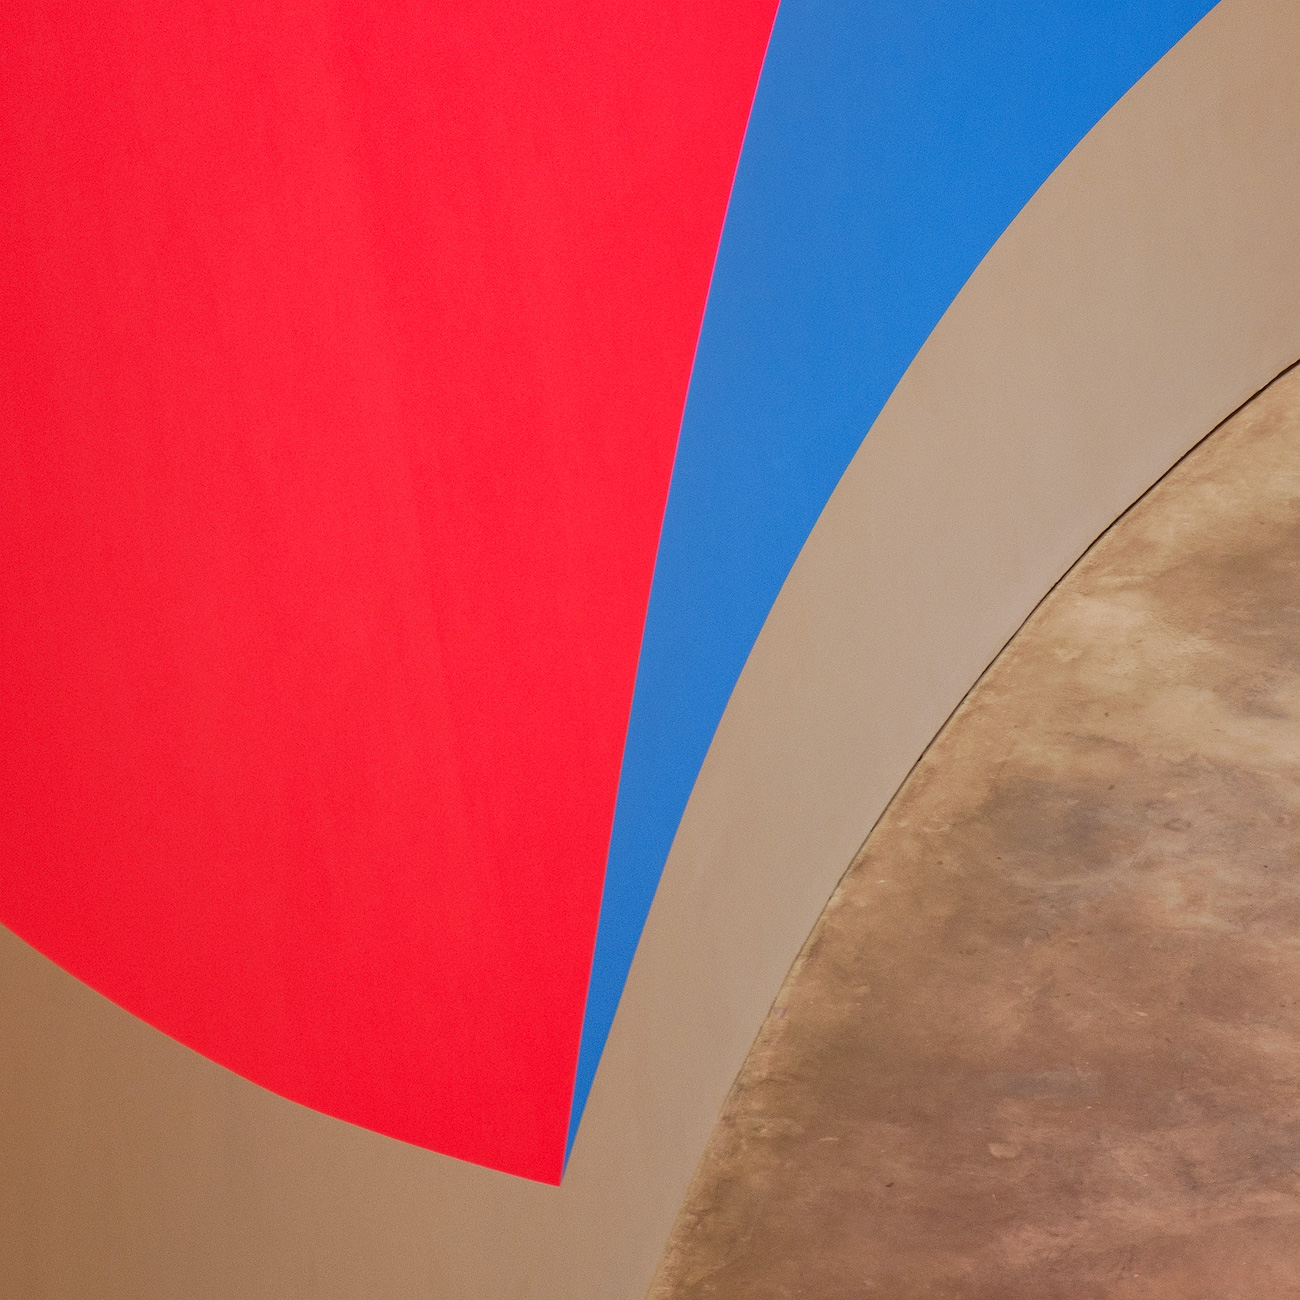 Wall drawings (geometric forms) by Sol Le Witt - Fuji X-E1 and 18-55mm lens @ 53mm